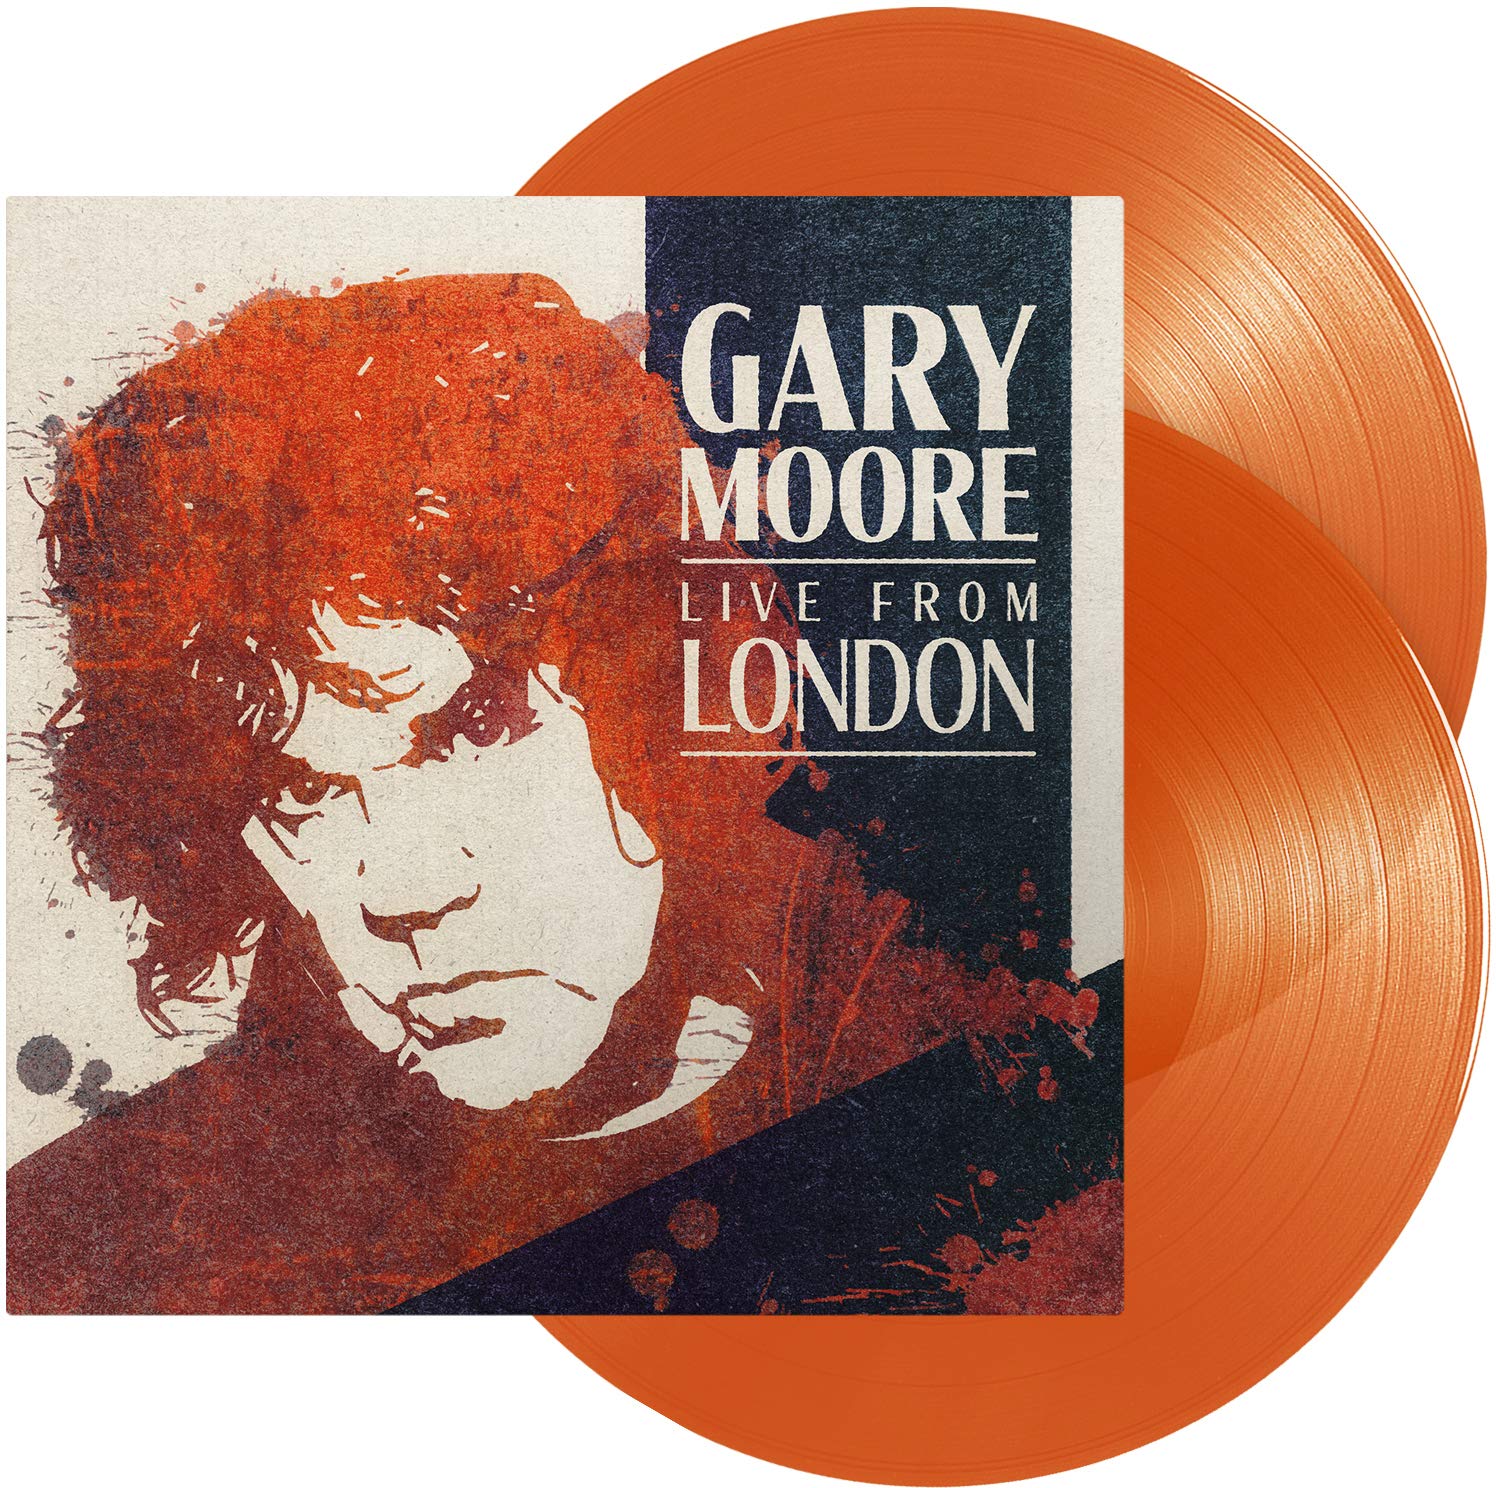 GARY MOORE - Live From London - 2LP - Limited Edition Orange Vinyl [OCT 9th]